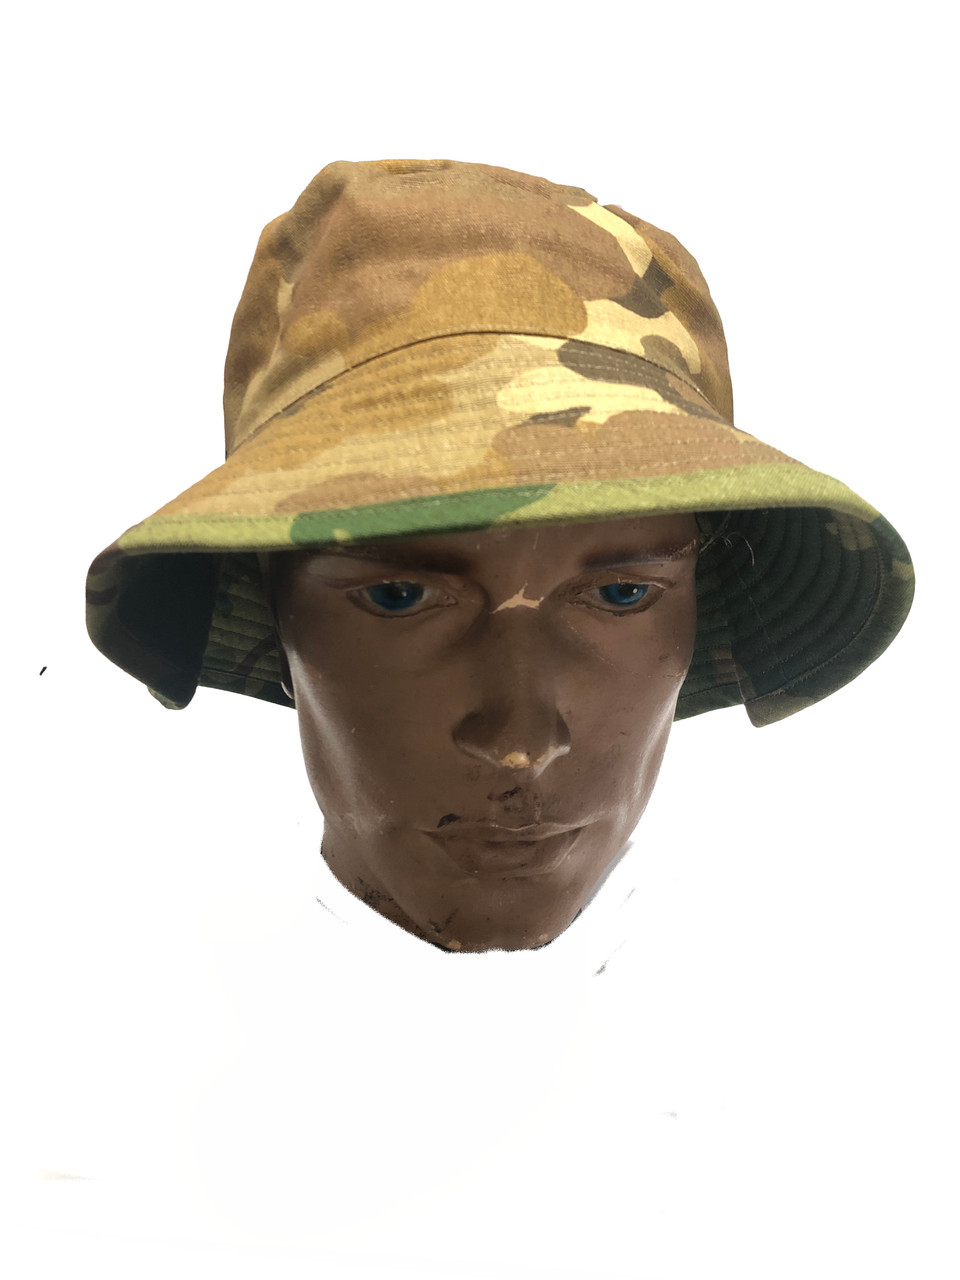 Mitchell Camouflage Boonie Hat Reversible - SARCO, Inc